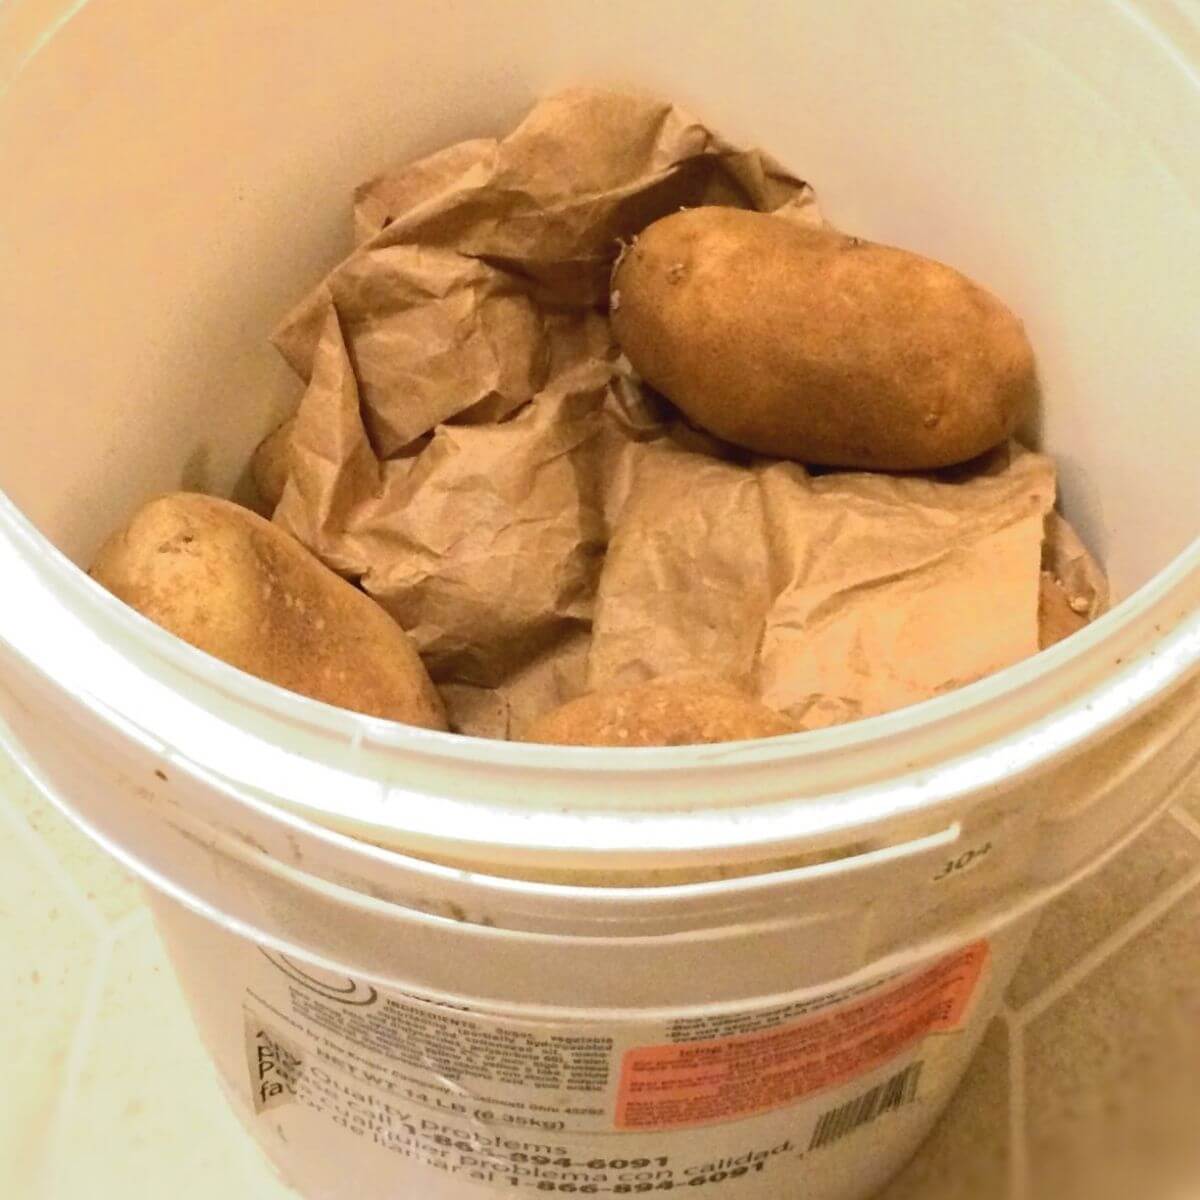 russet potatoes in a 5 gallon recycled bucket with brown paper inside for padding